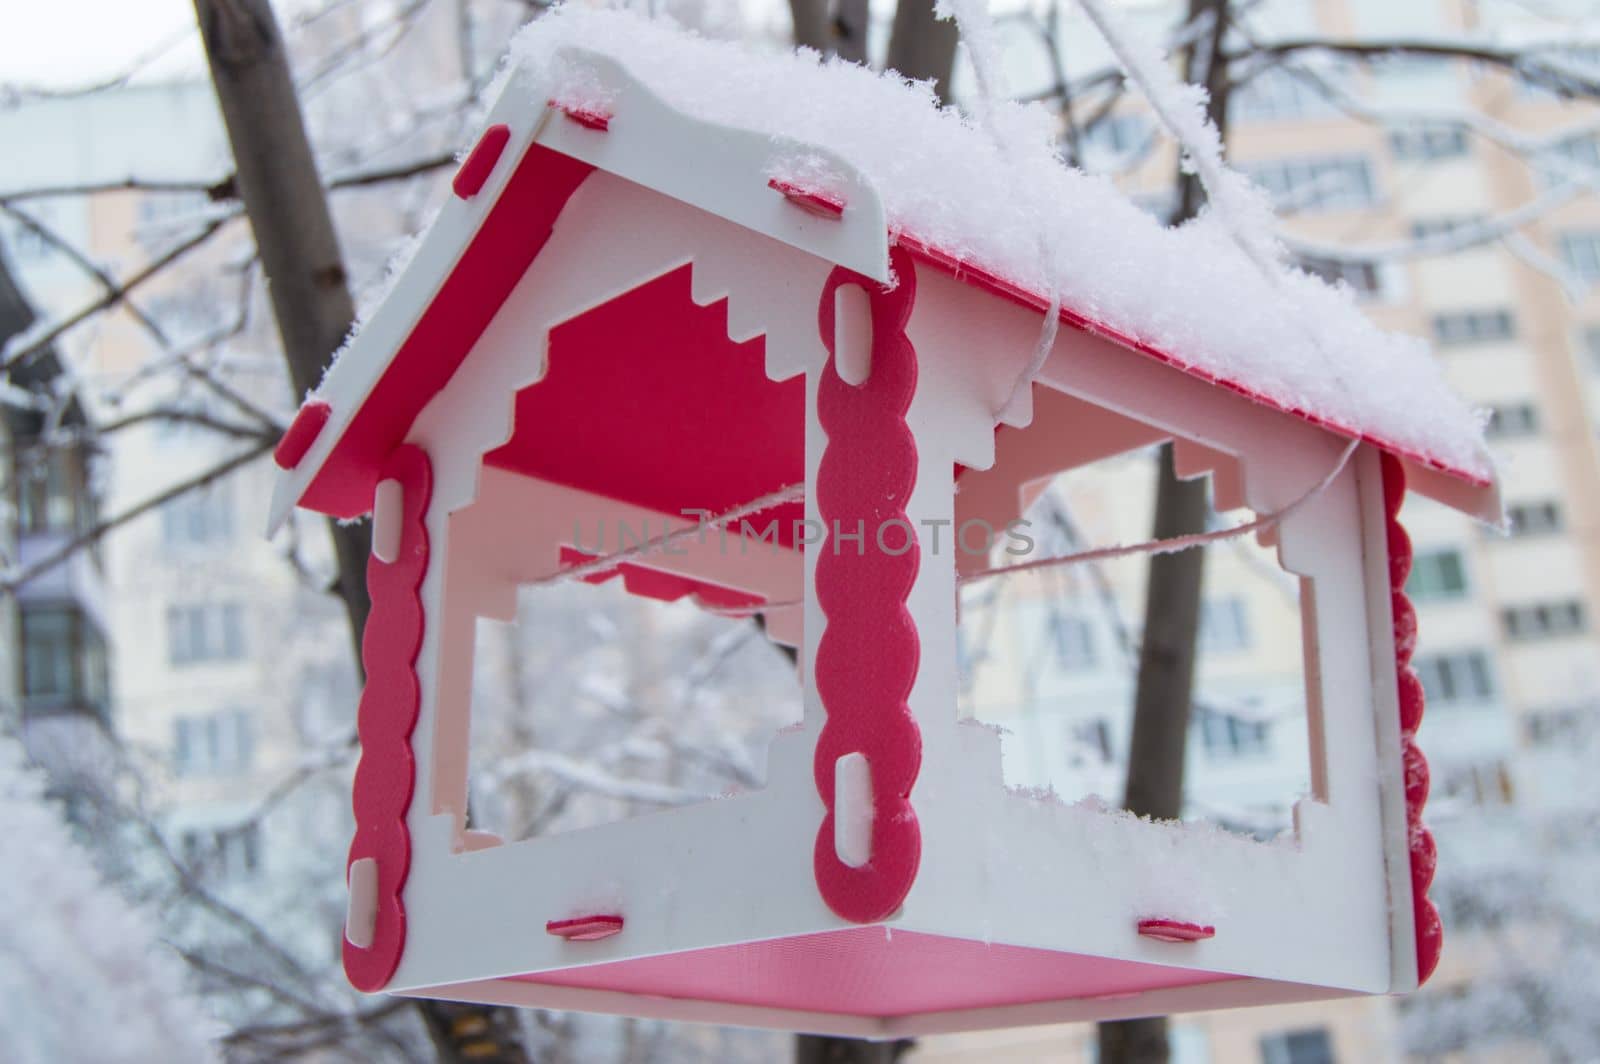 Red bird feeder hanging on a tree covered with snow in the city in winter.